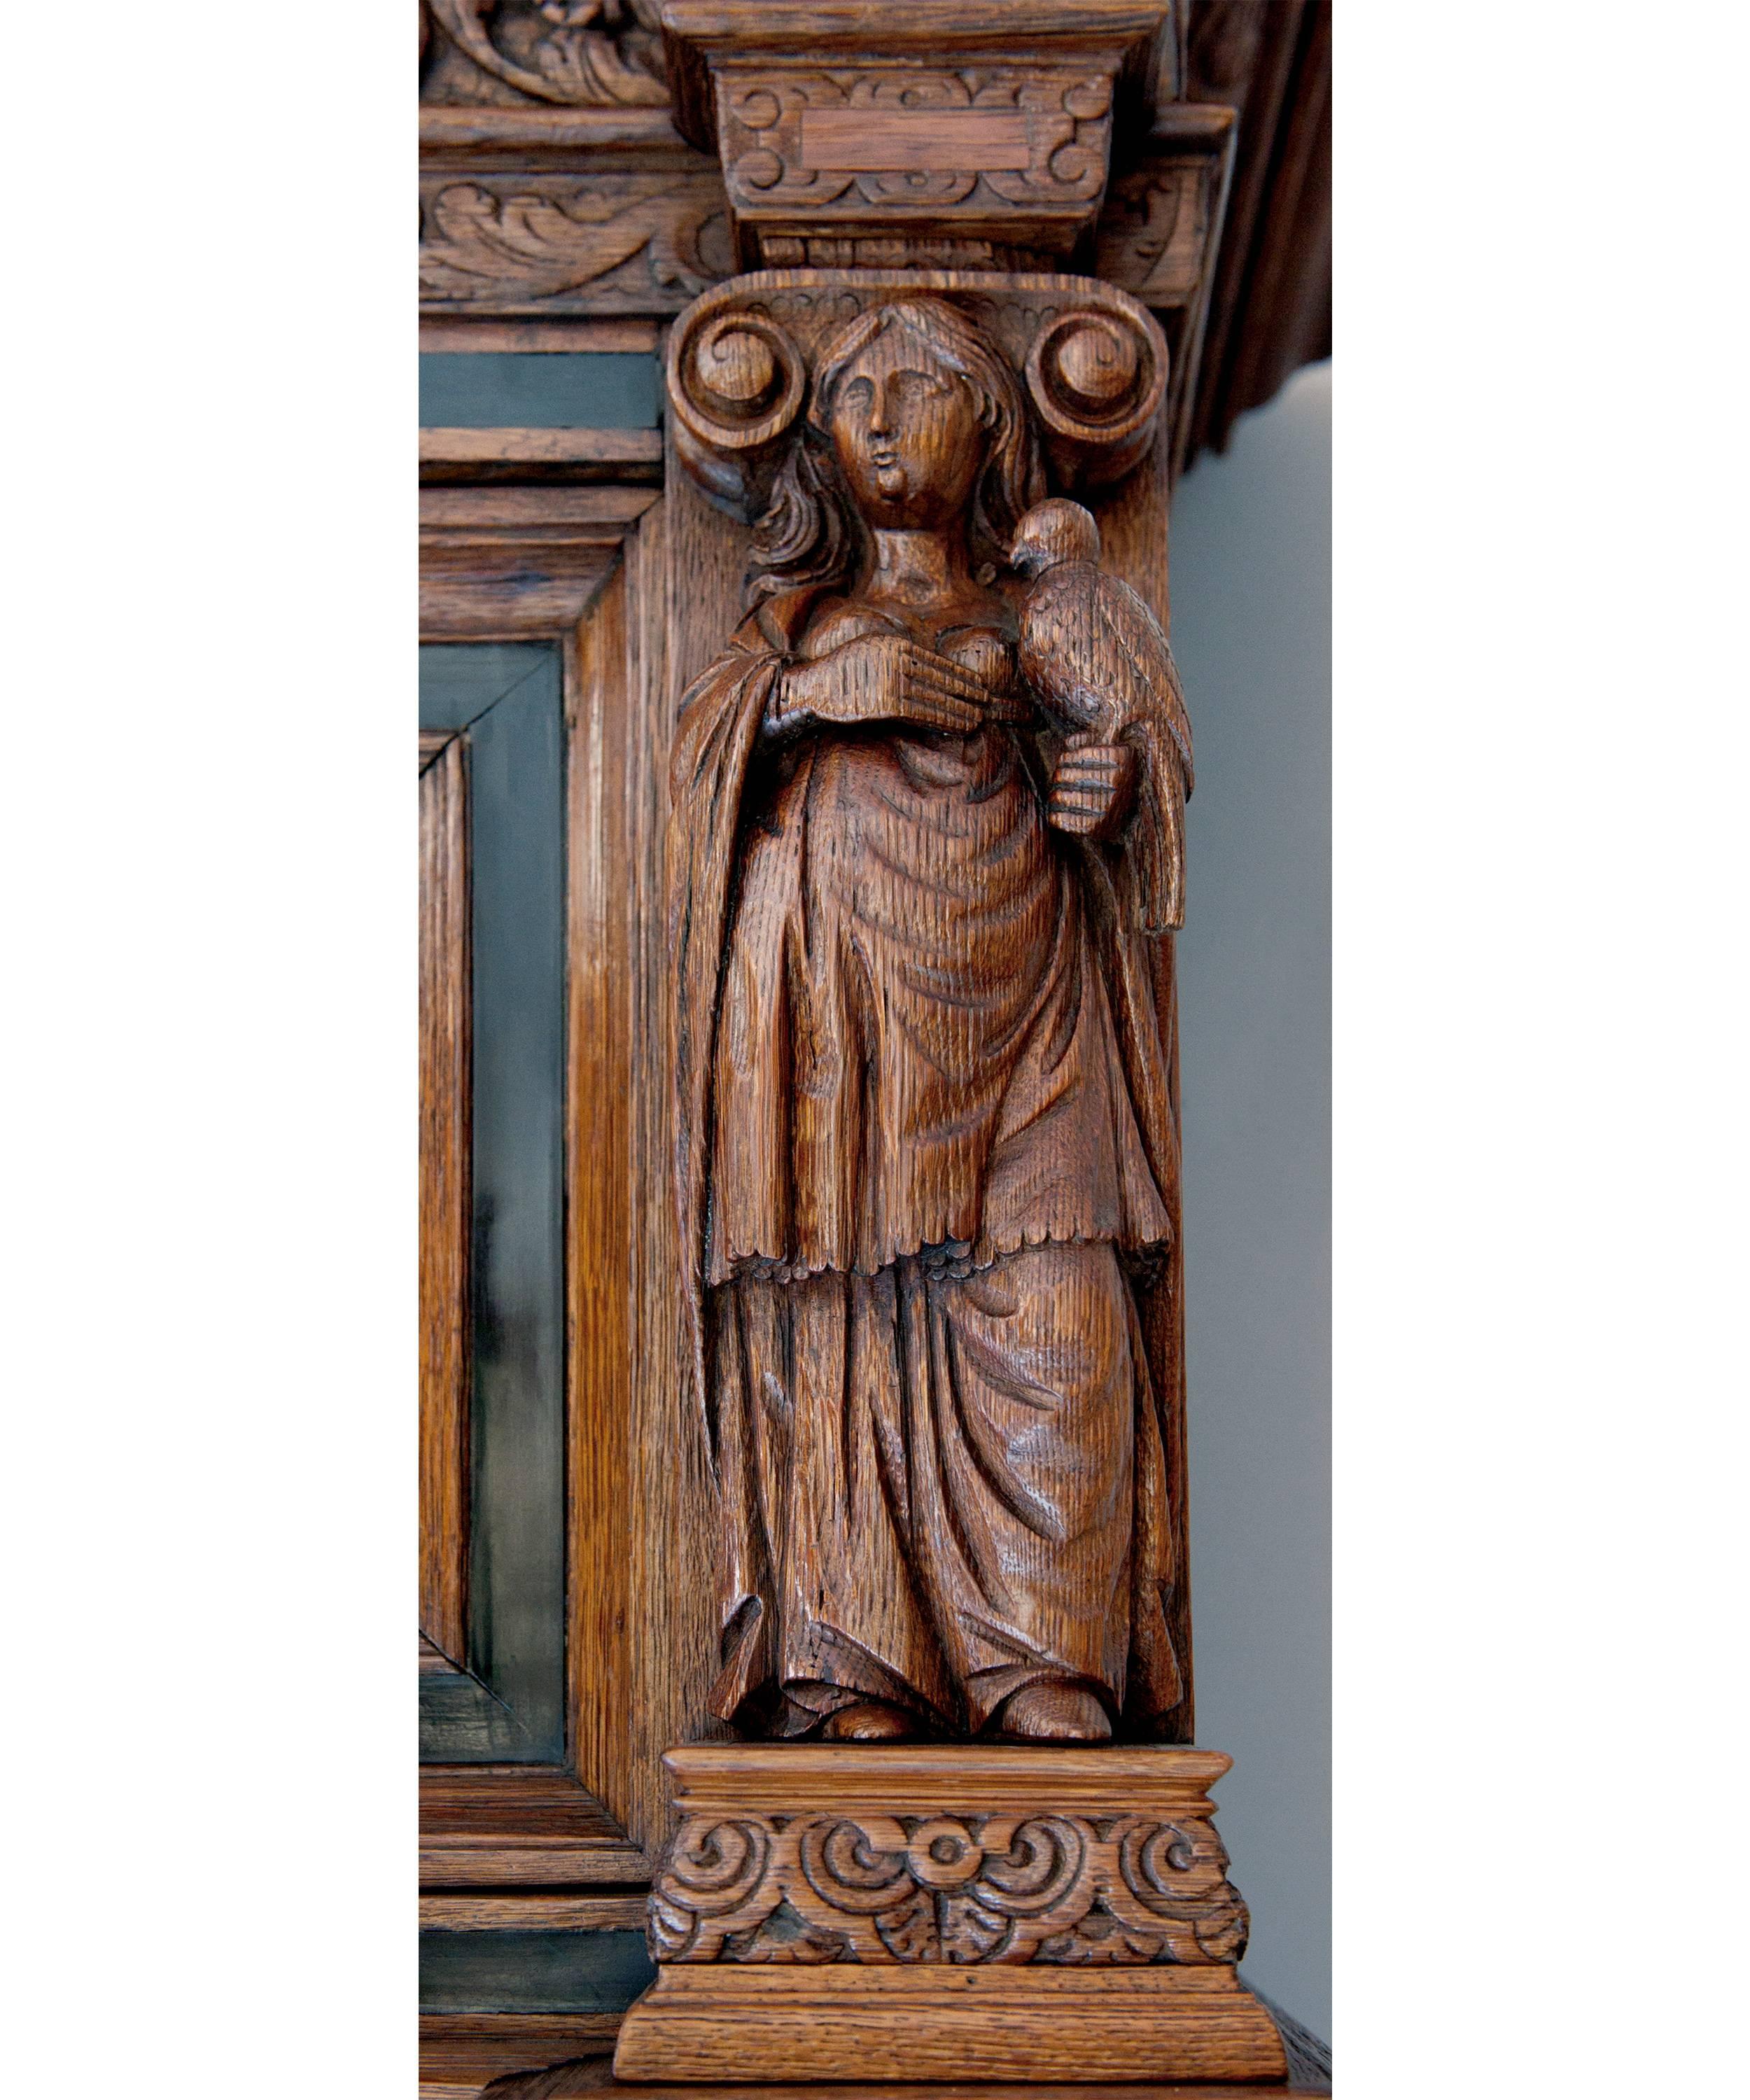 A four-door cabinet decorated with statuettes is the richest and most distinctive piece of furniture from the Dutch 17th century. The statuettes were carved in oak, not by the carpenters themselves, but by the appropriate sculptors.
Such costly